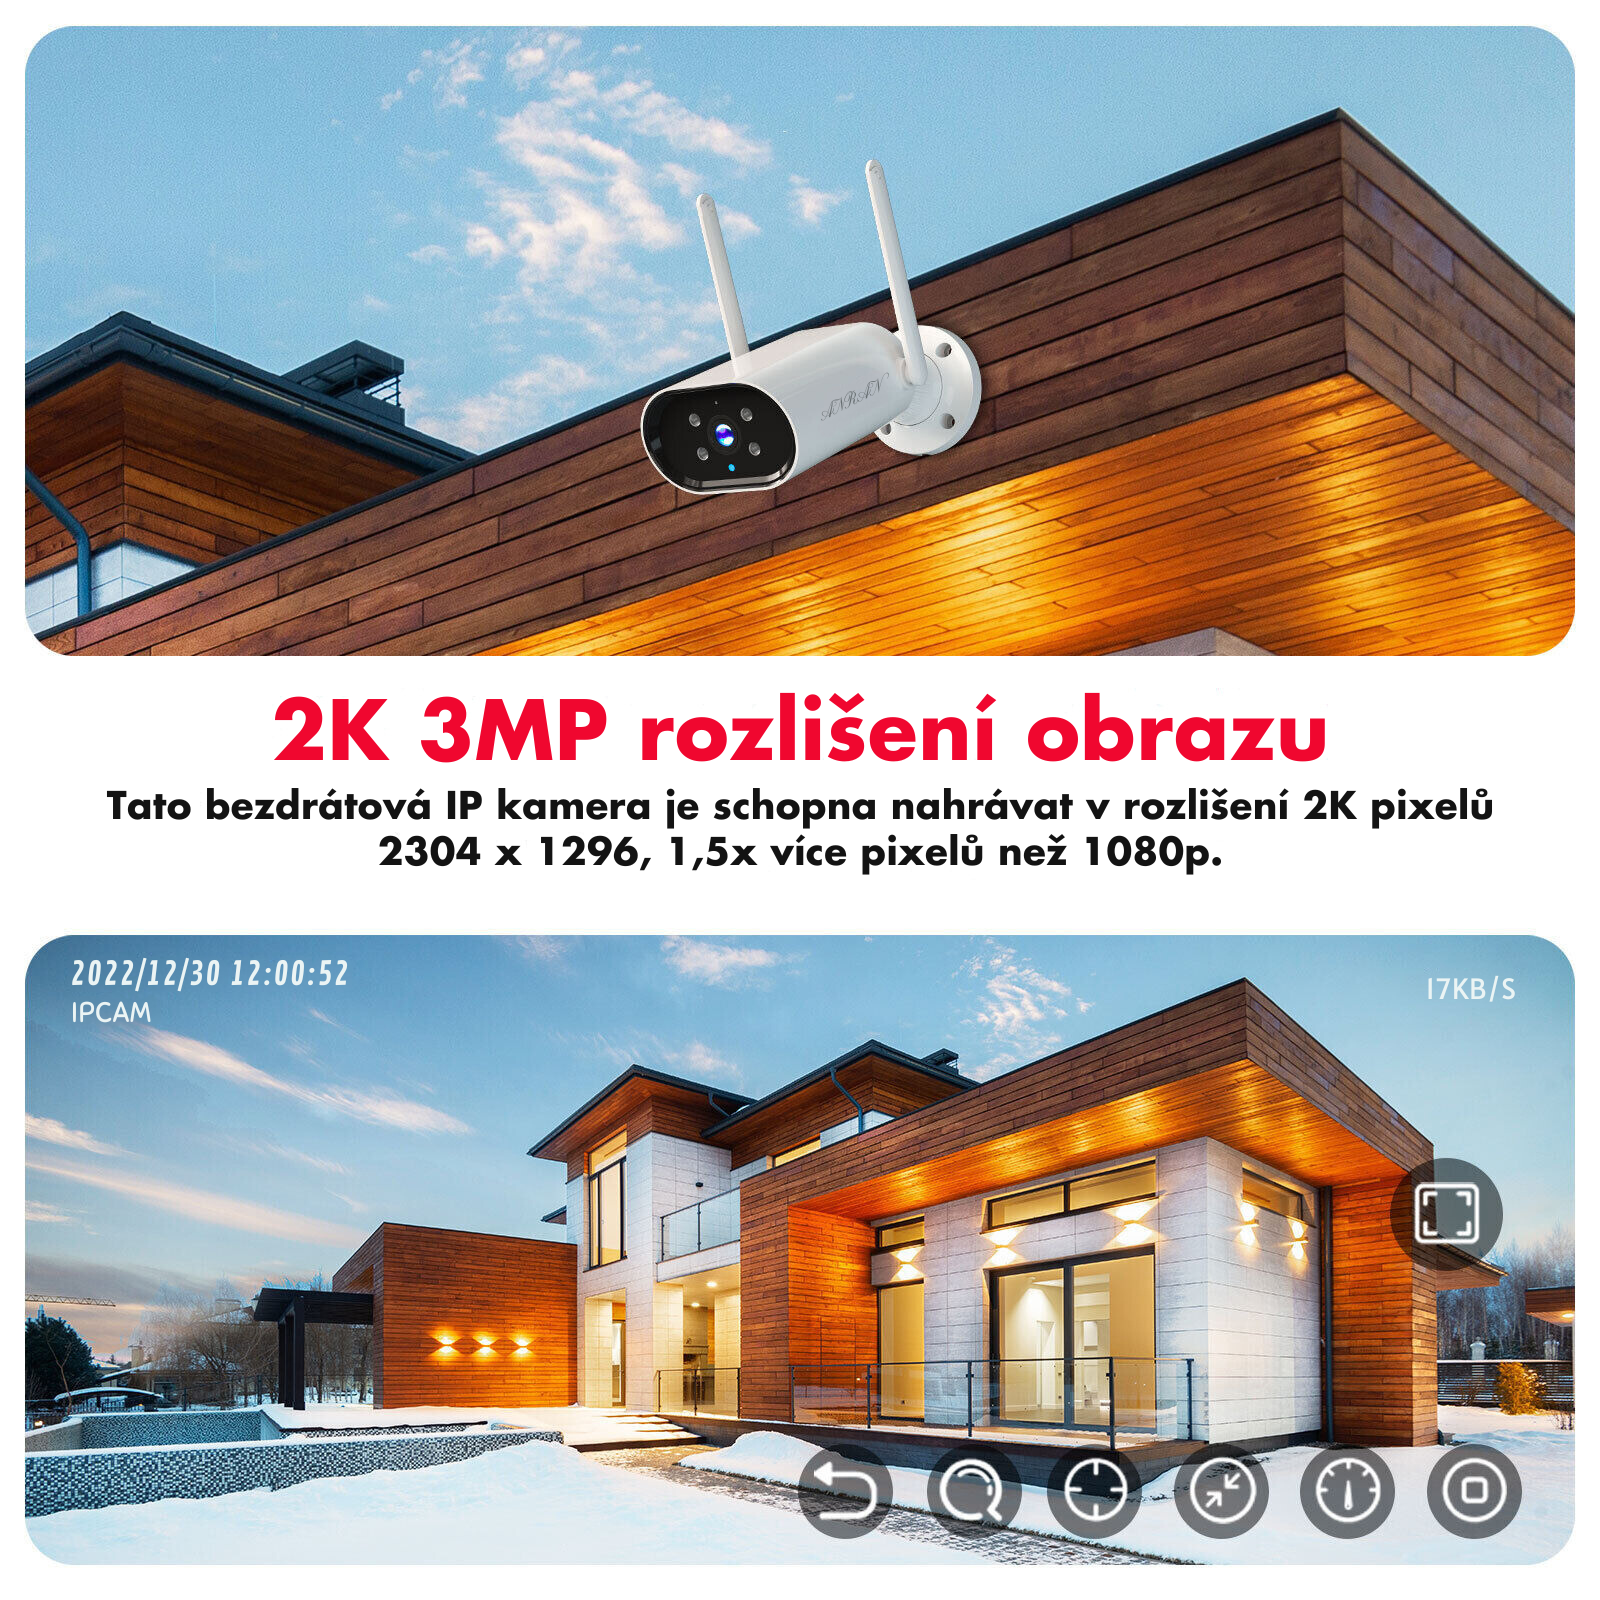 2K This wireless IP camera is capable of recording a 2K pixel resolution of 2304 X 1296, 1.5x the amount of pixels of 1080p.